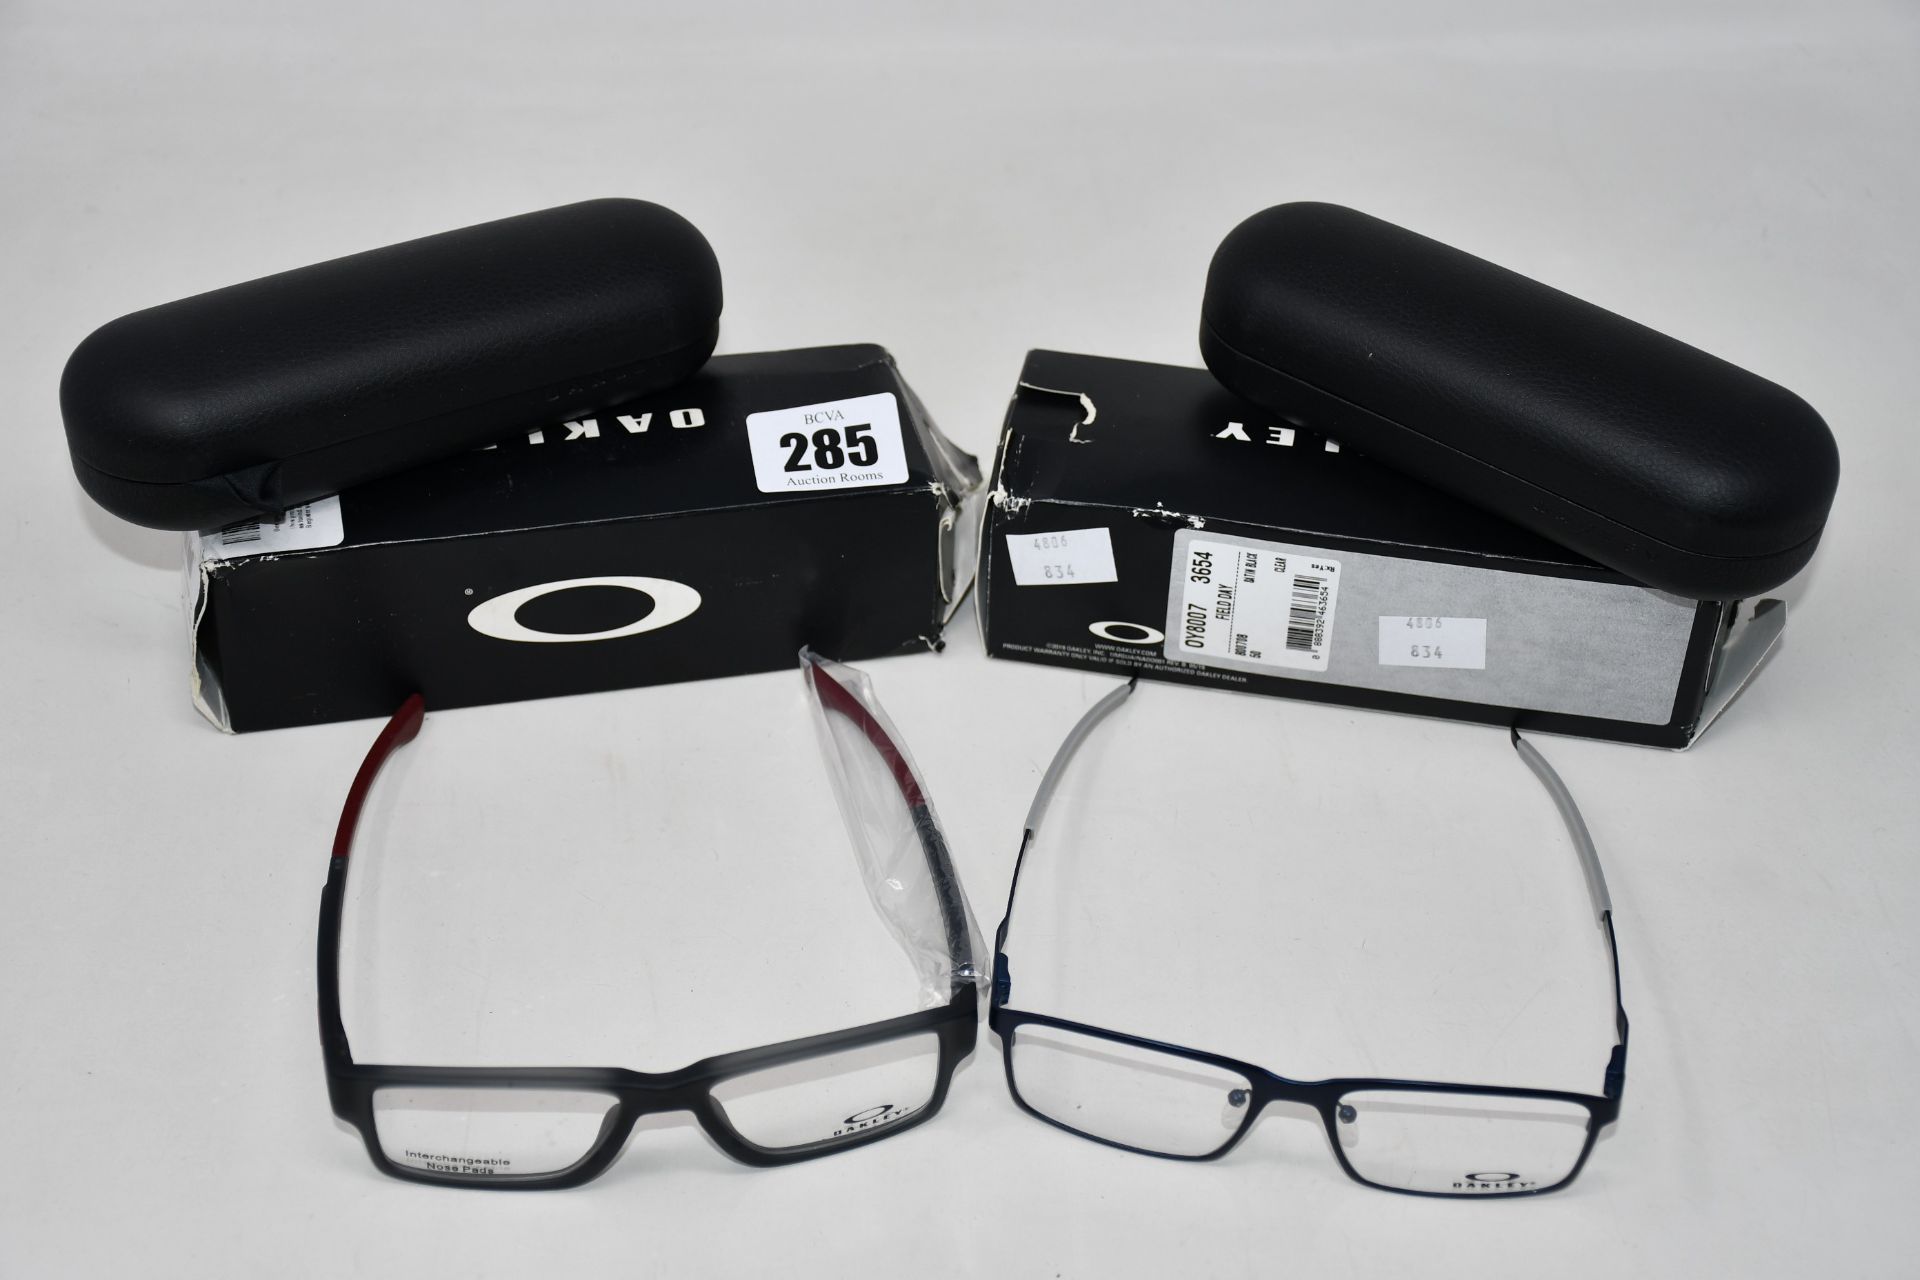 A pair of as new Oakley Airdrop Trubridge glasses frames and a pair of as new Oakley Field Day